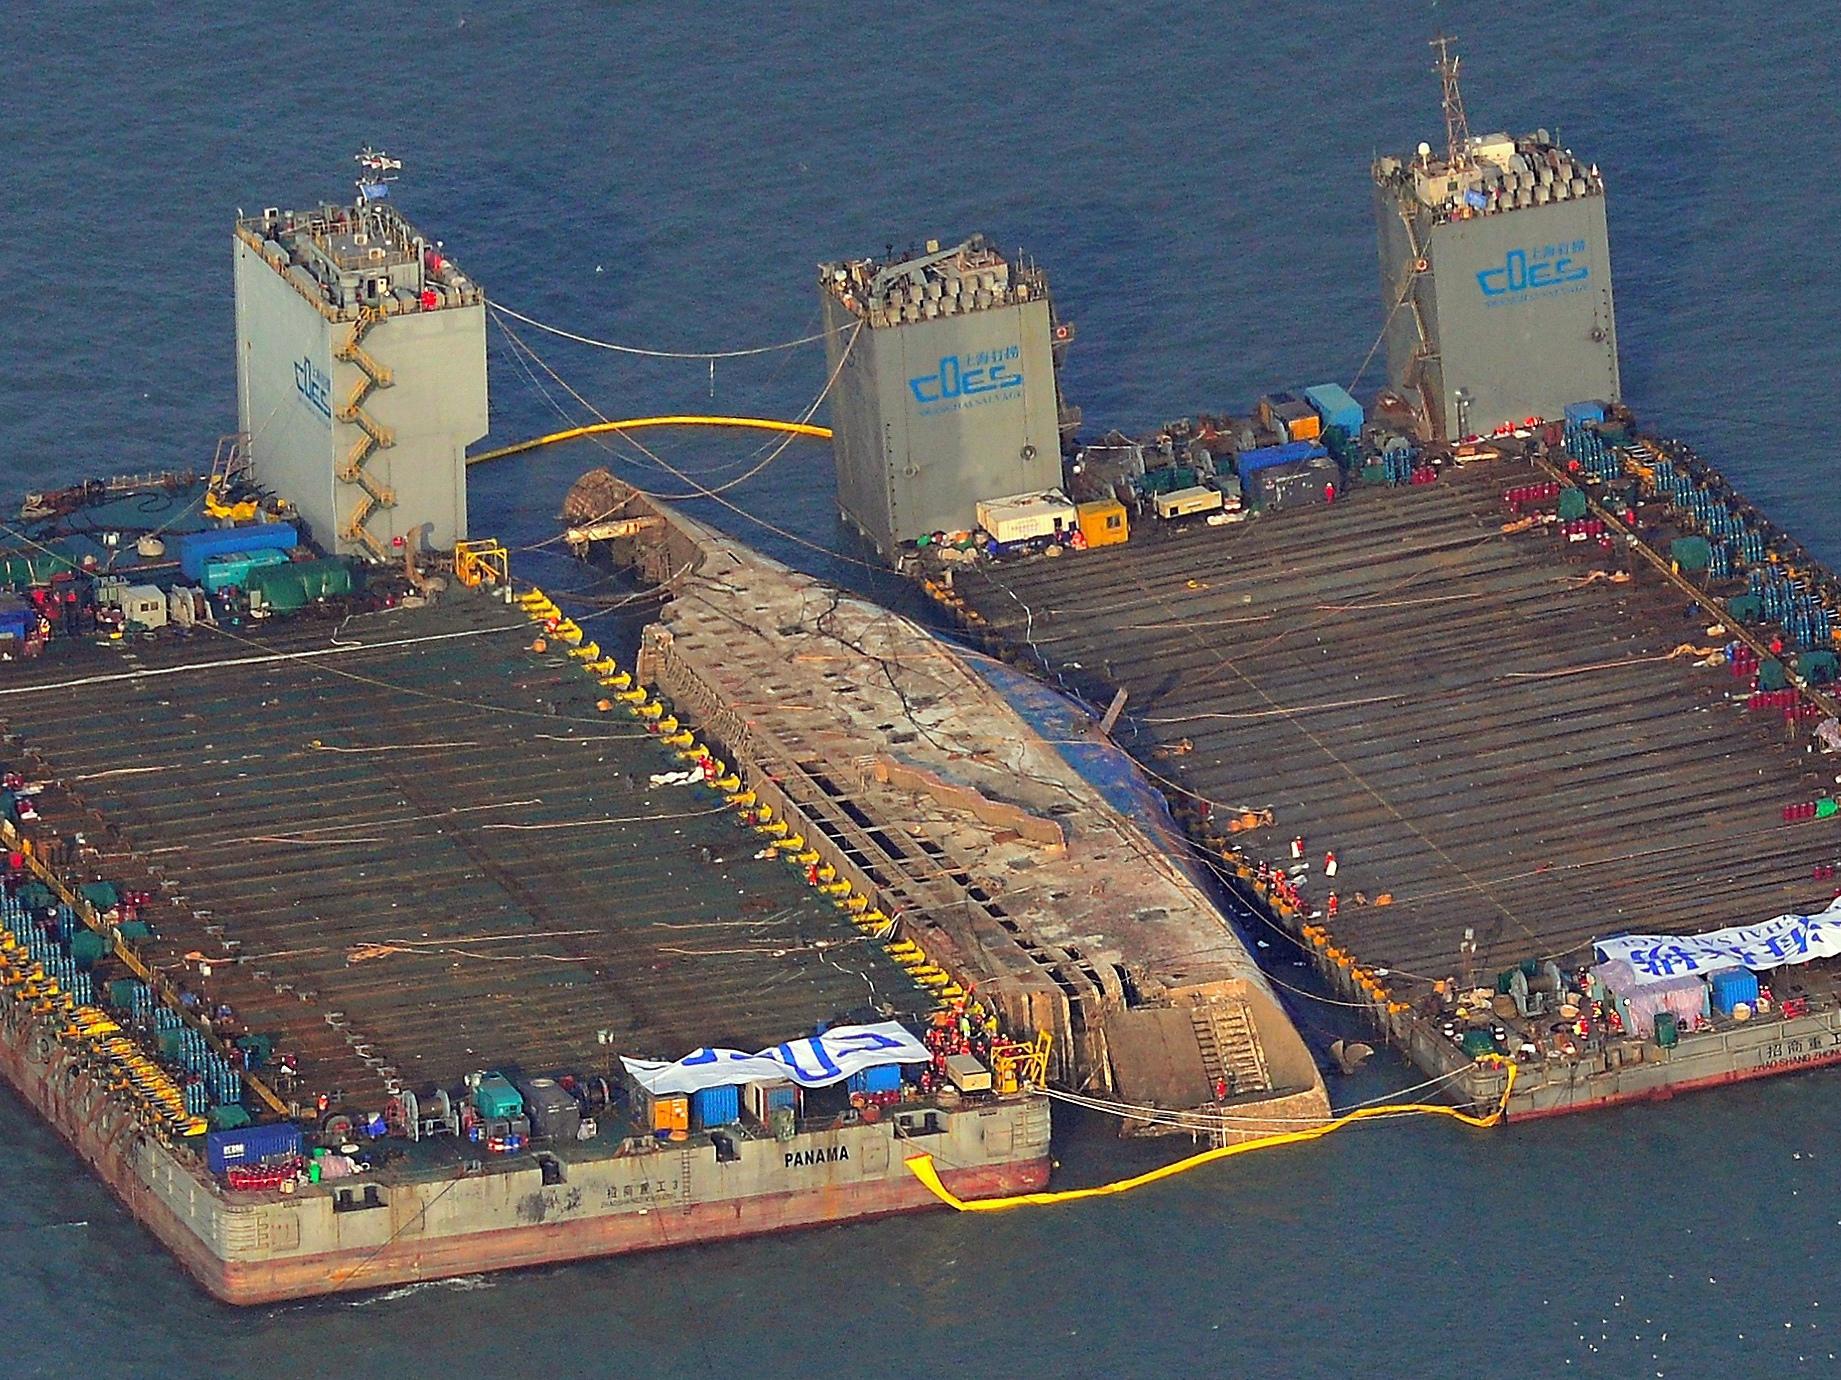 South Korea Tries To Raise Sewol Ferry Nearly 3 Years After Deadly Sinking Wvxu